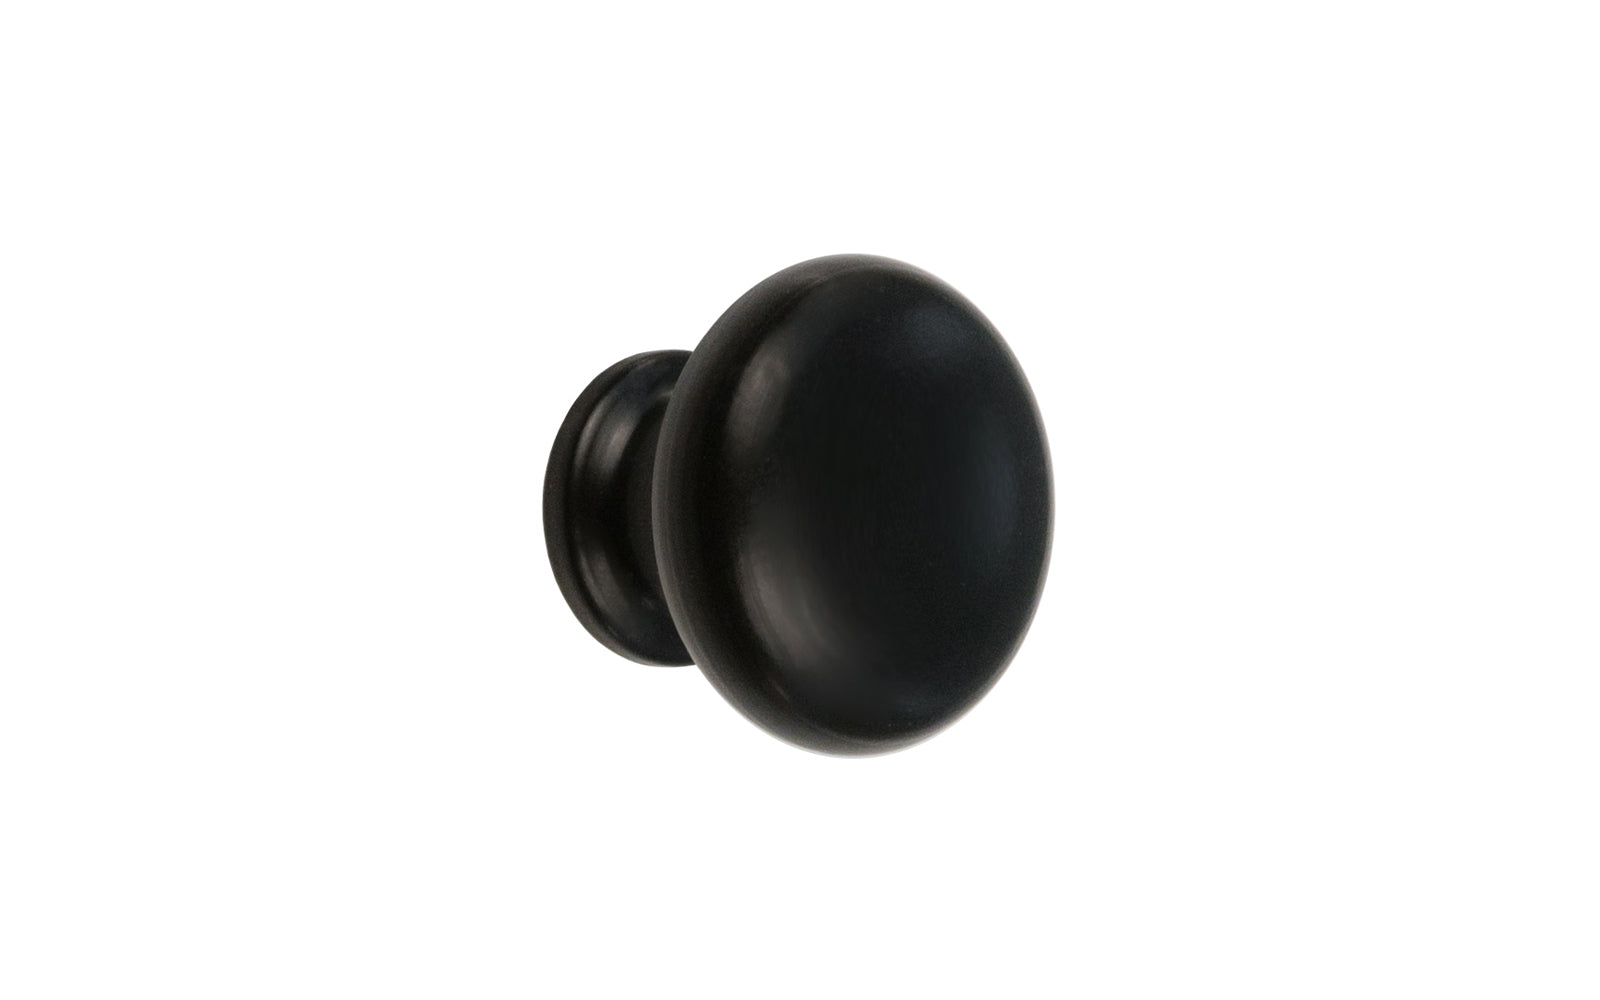 A classic & traditional small black finish cabinet knob. 3/4" diameter. The knob is made of brass material with a black finish & has a smooth & attractive look & feel. The mini "mushroom" knob is ideal for small drawers, bookcases, cubbyholes, small boxes, & other small furniture pieces & cabinets.